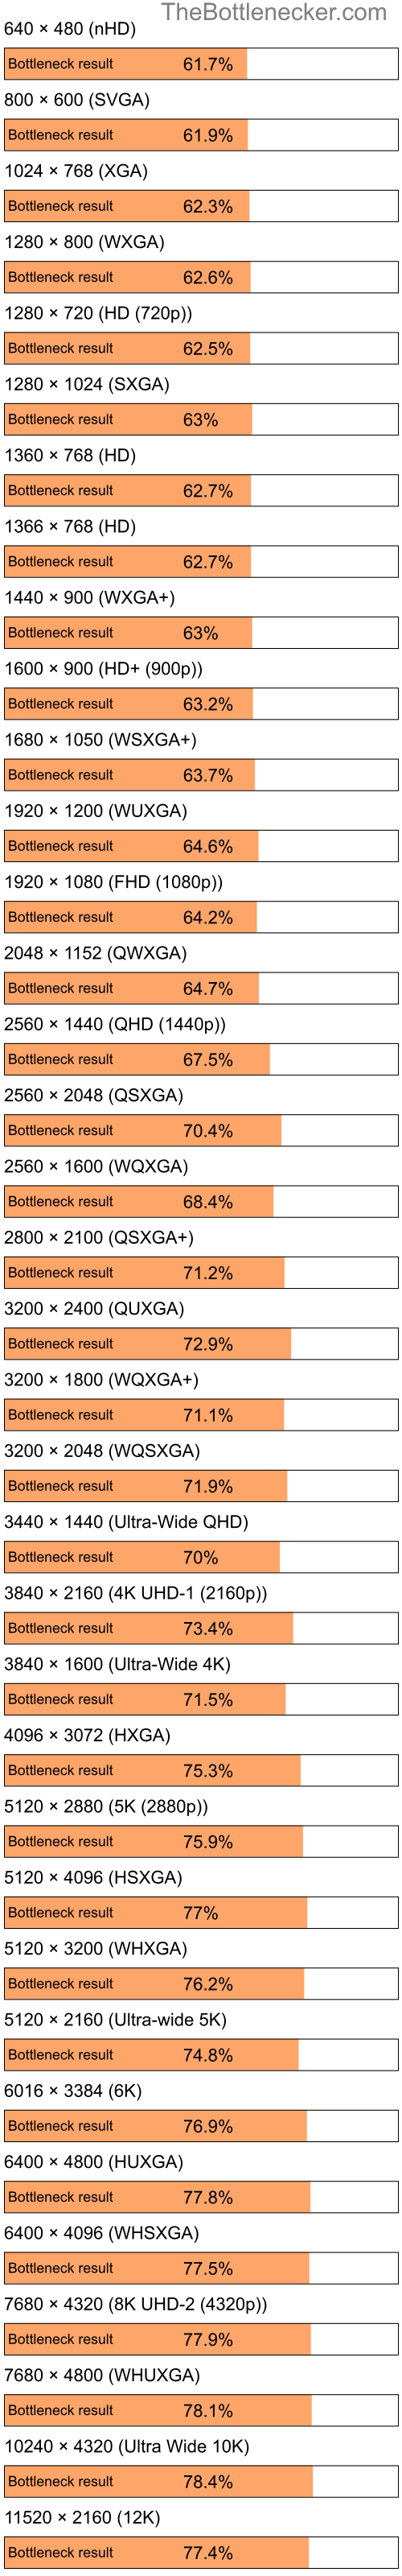 Bottleneck results by resolution for Intel Atom Z520 and AMD Mobility Radeon HD 3430 in General Tasks